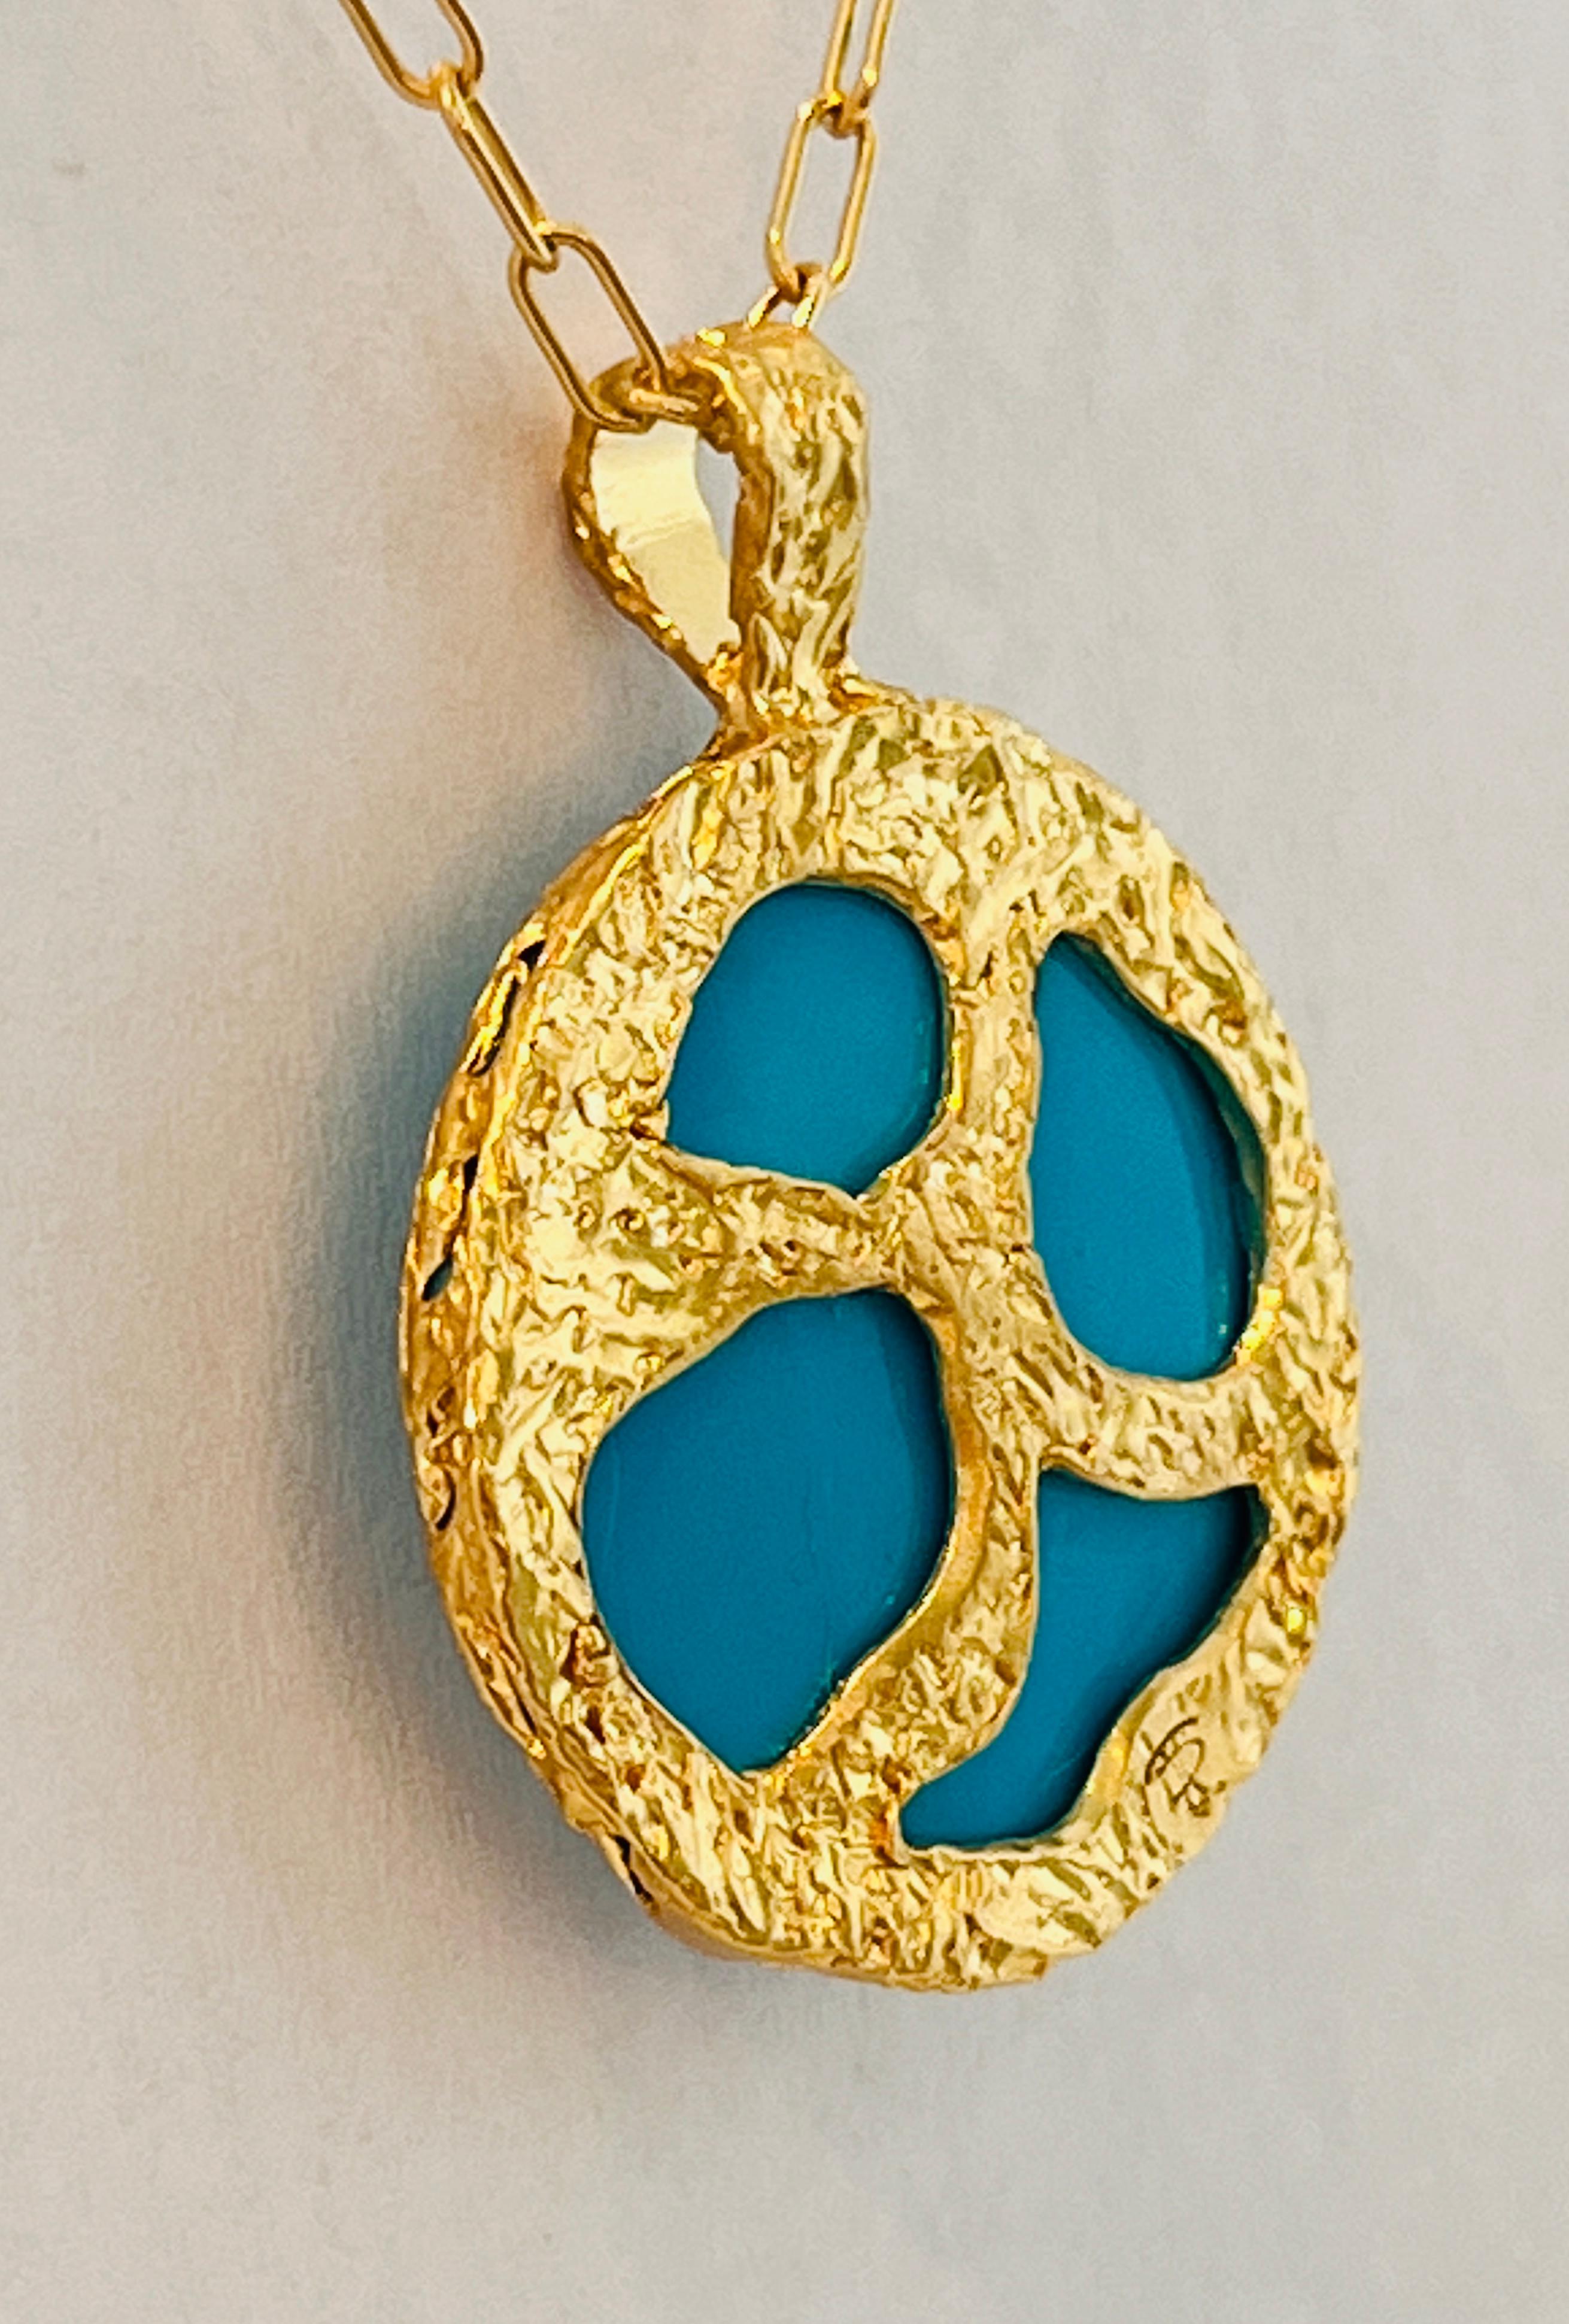 Turquoise Handmade Pendant in 22k Gold, by Tagili 5